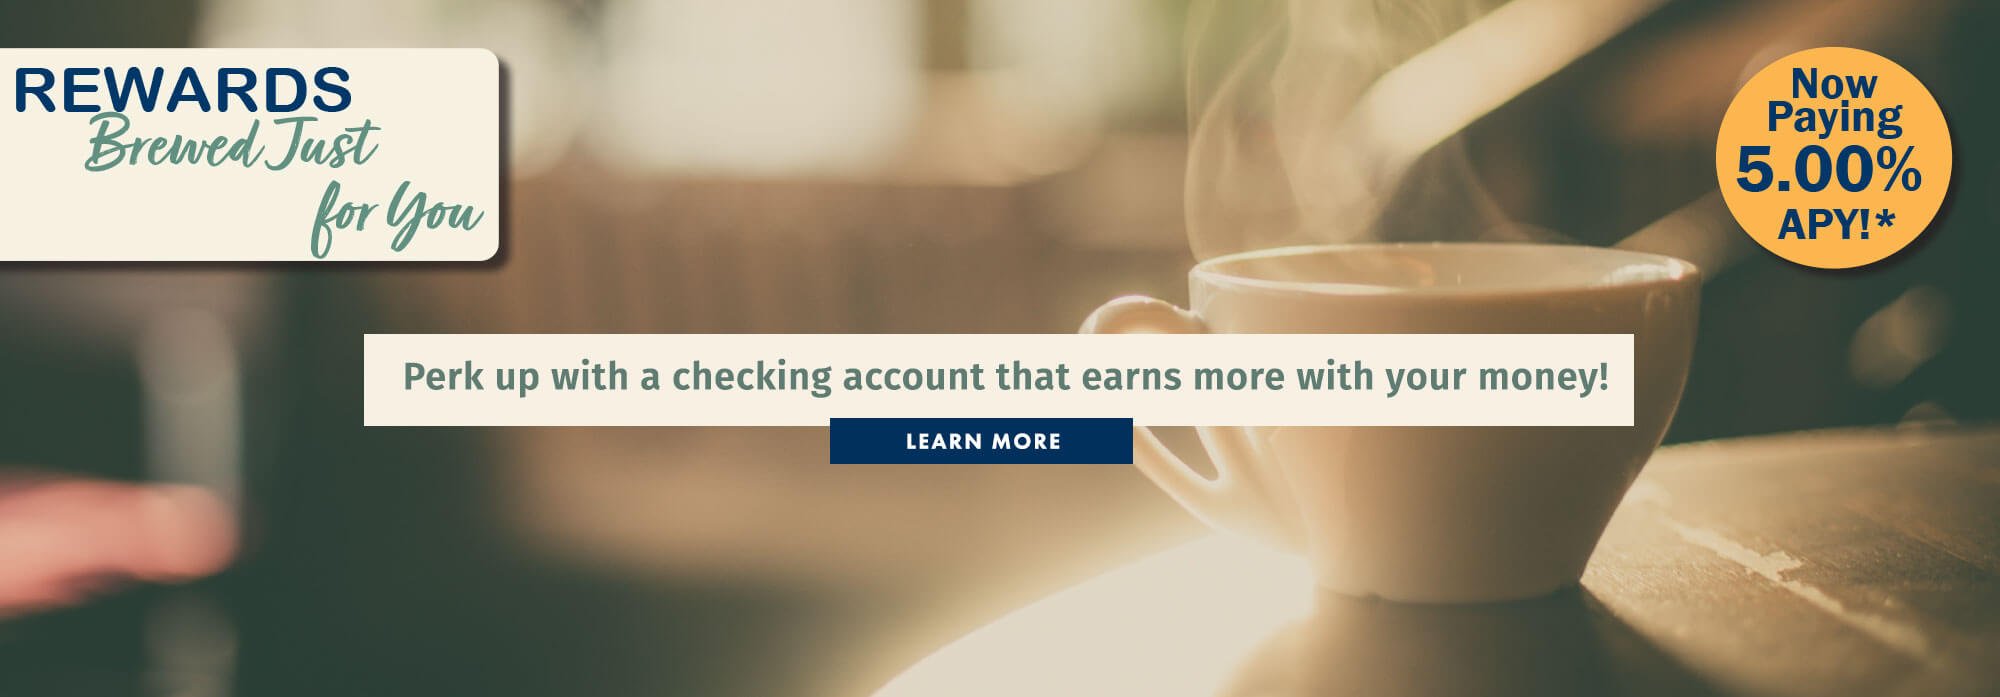 Perk up with a checking account that earns more with your money!